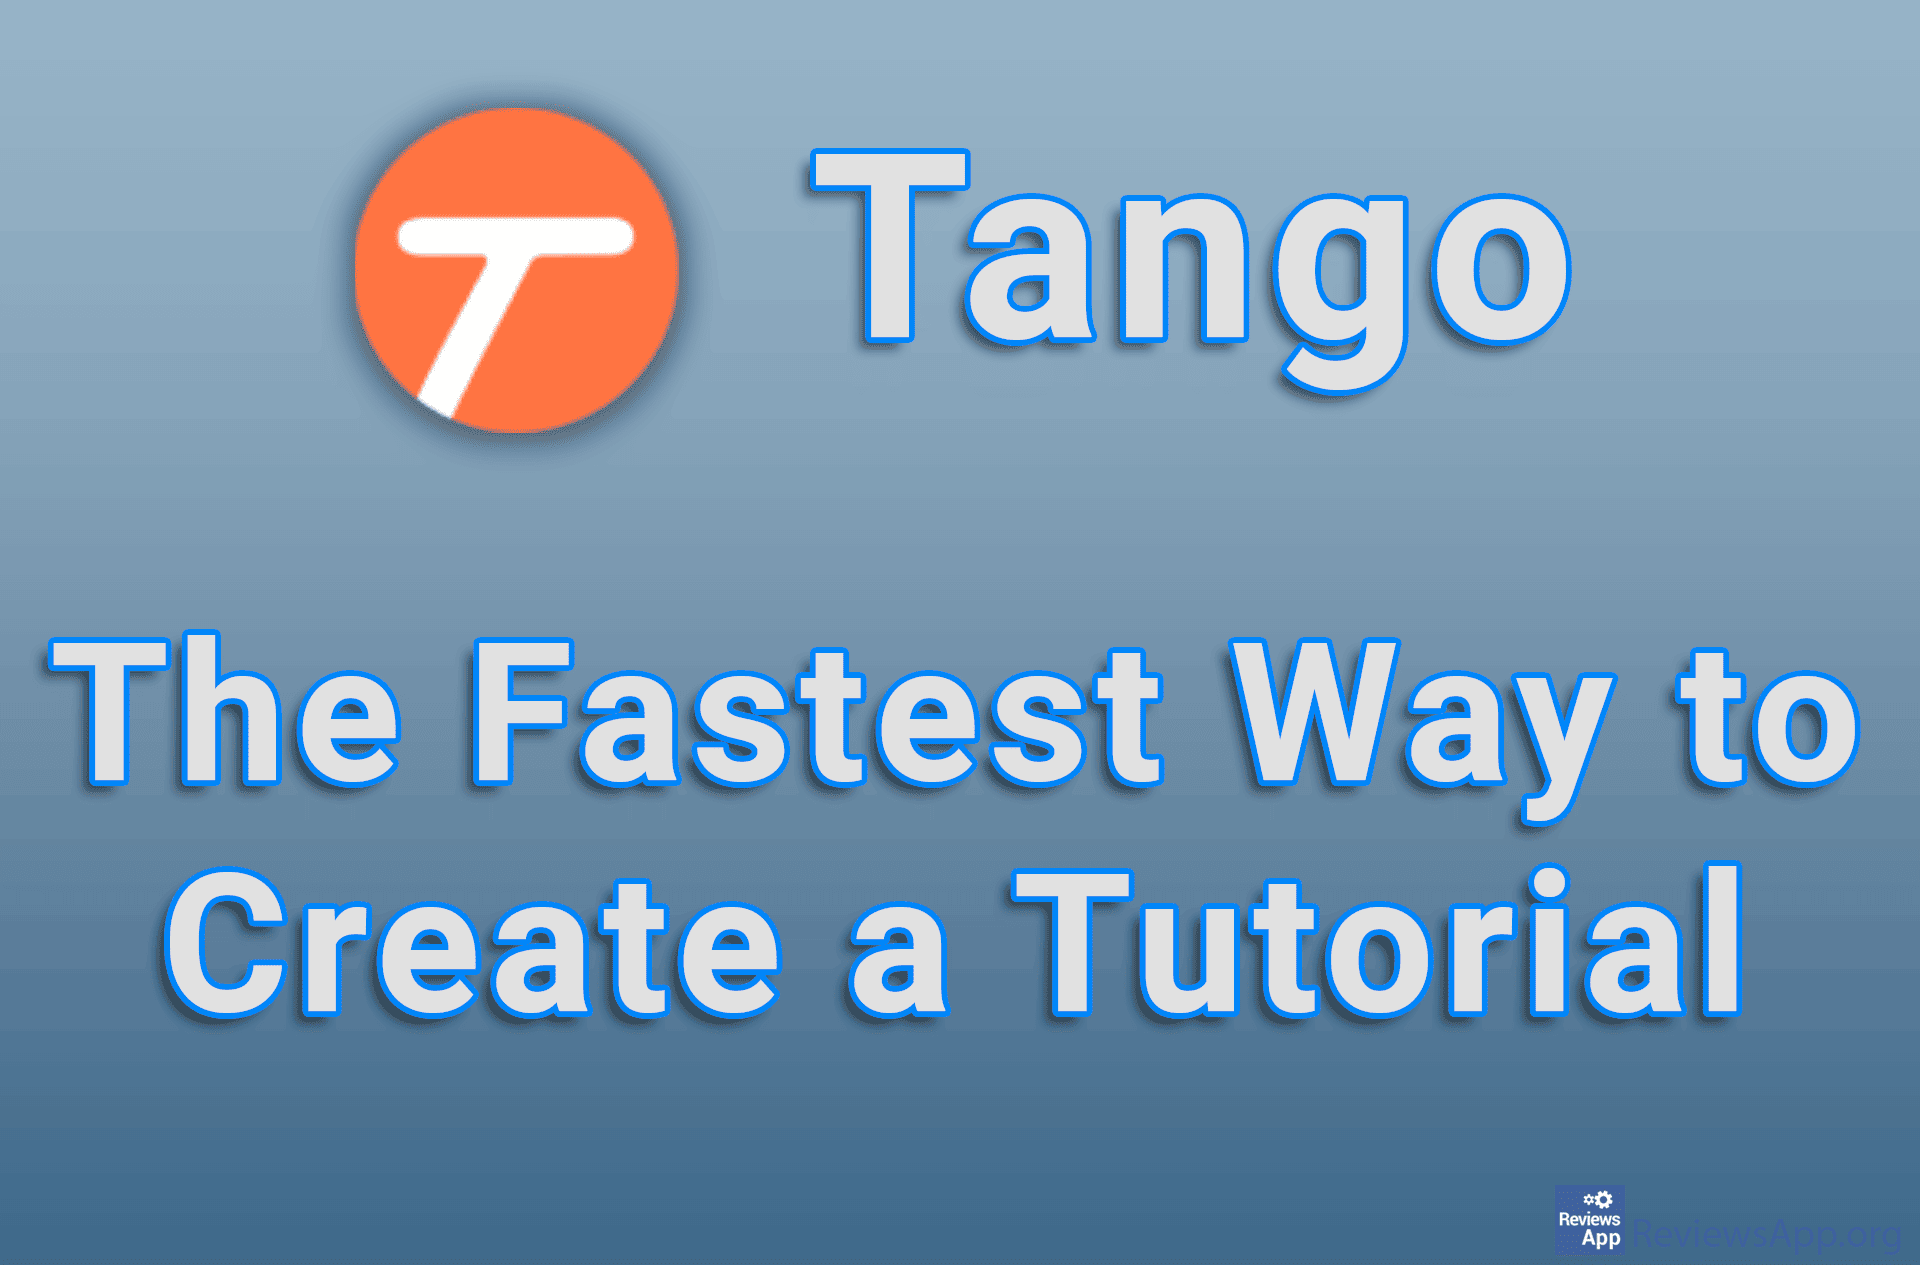 Tango – The Fastest Way to Create a Tutorial